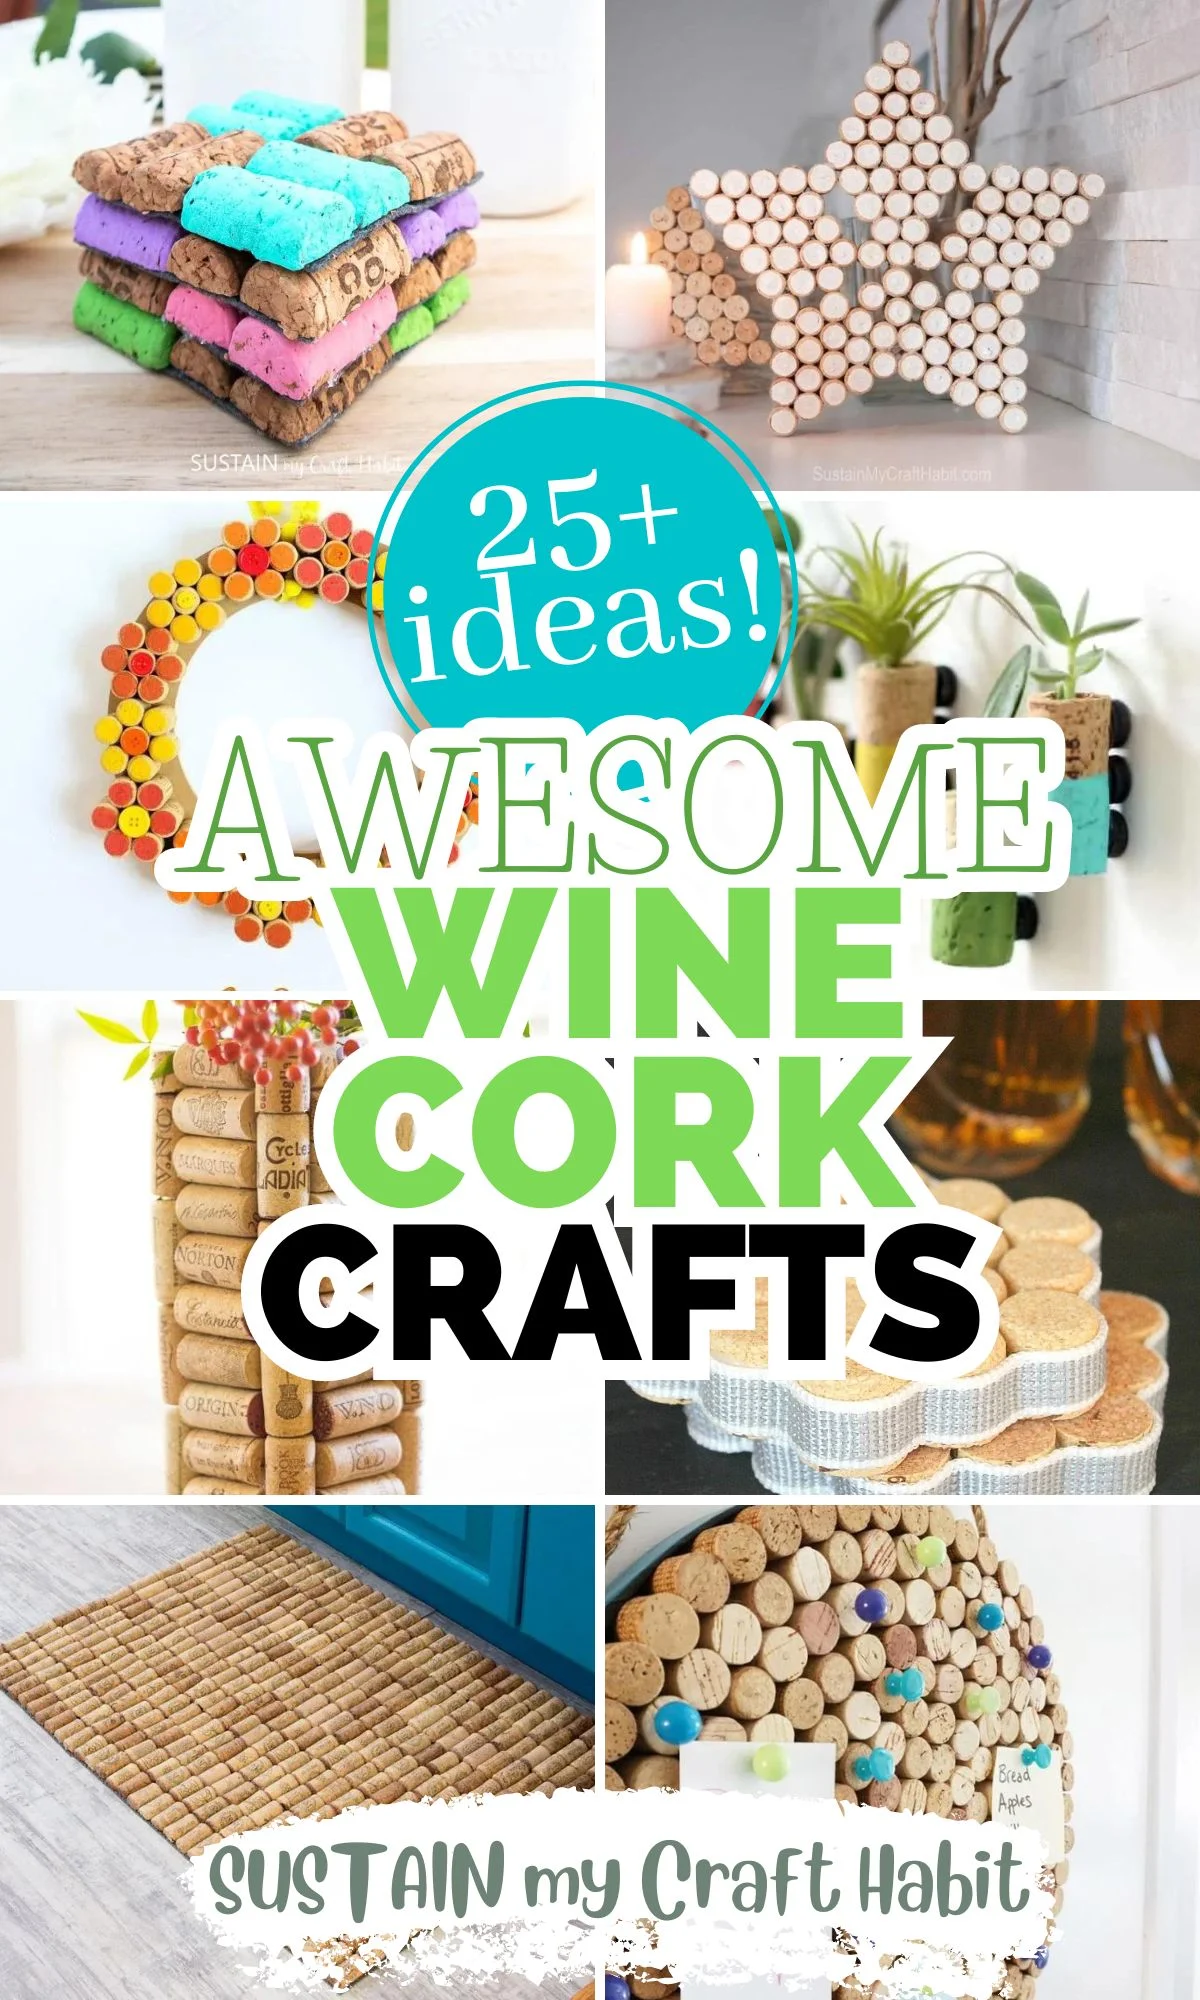 Collage of images showing easy wine cork crafts to make.